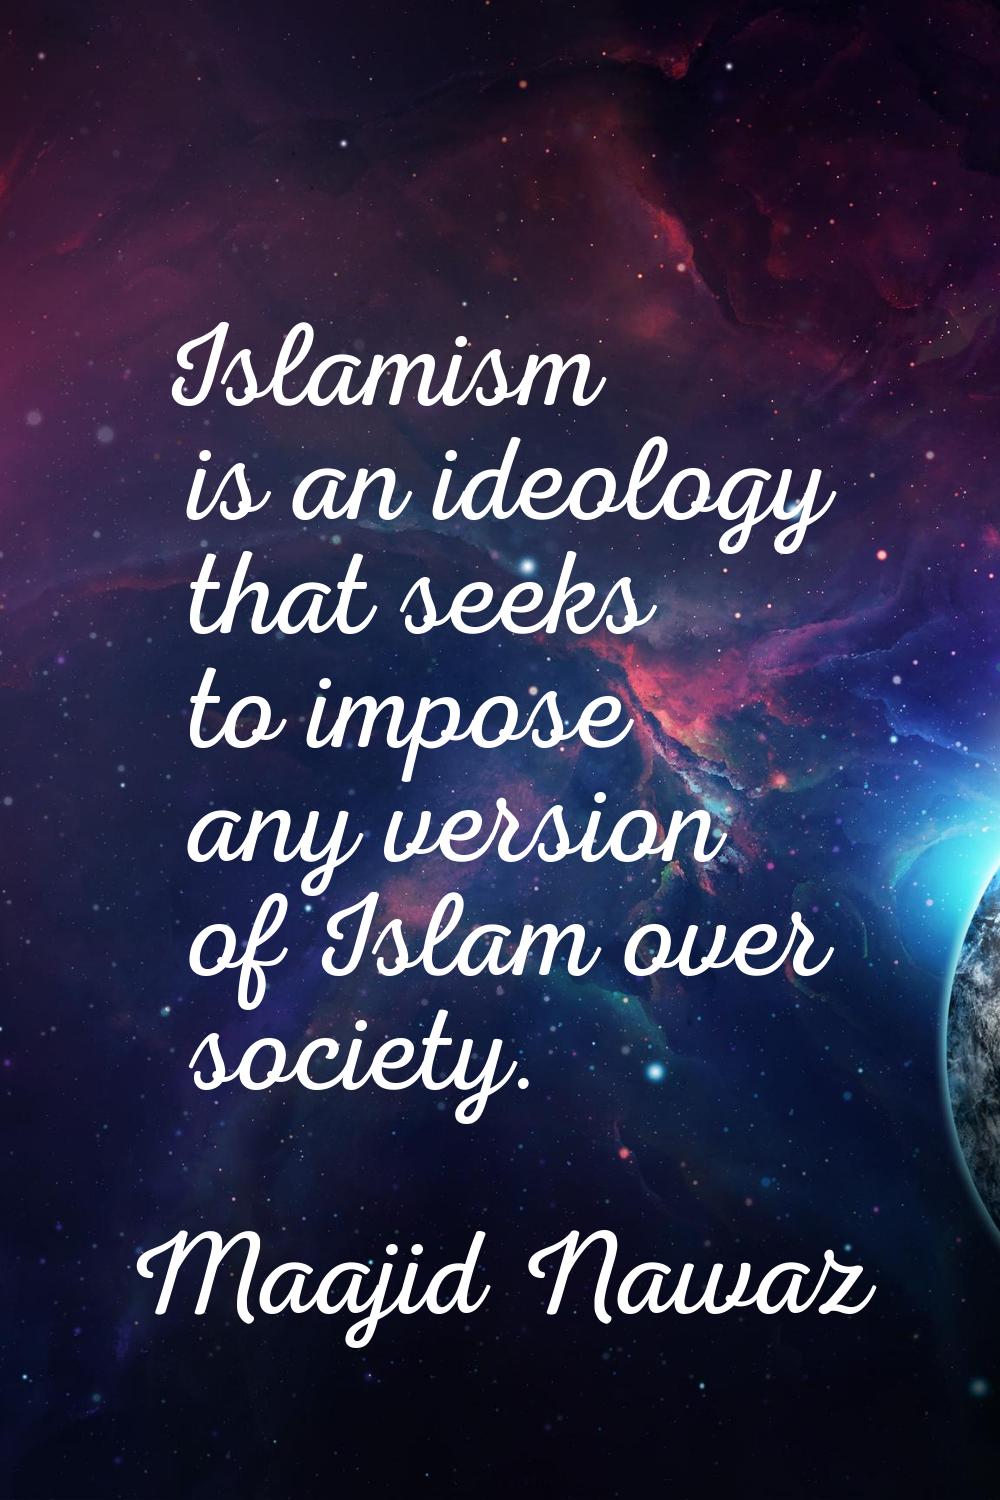 Islamism is an ideology that seeks to impose any version of Islam over society.